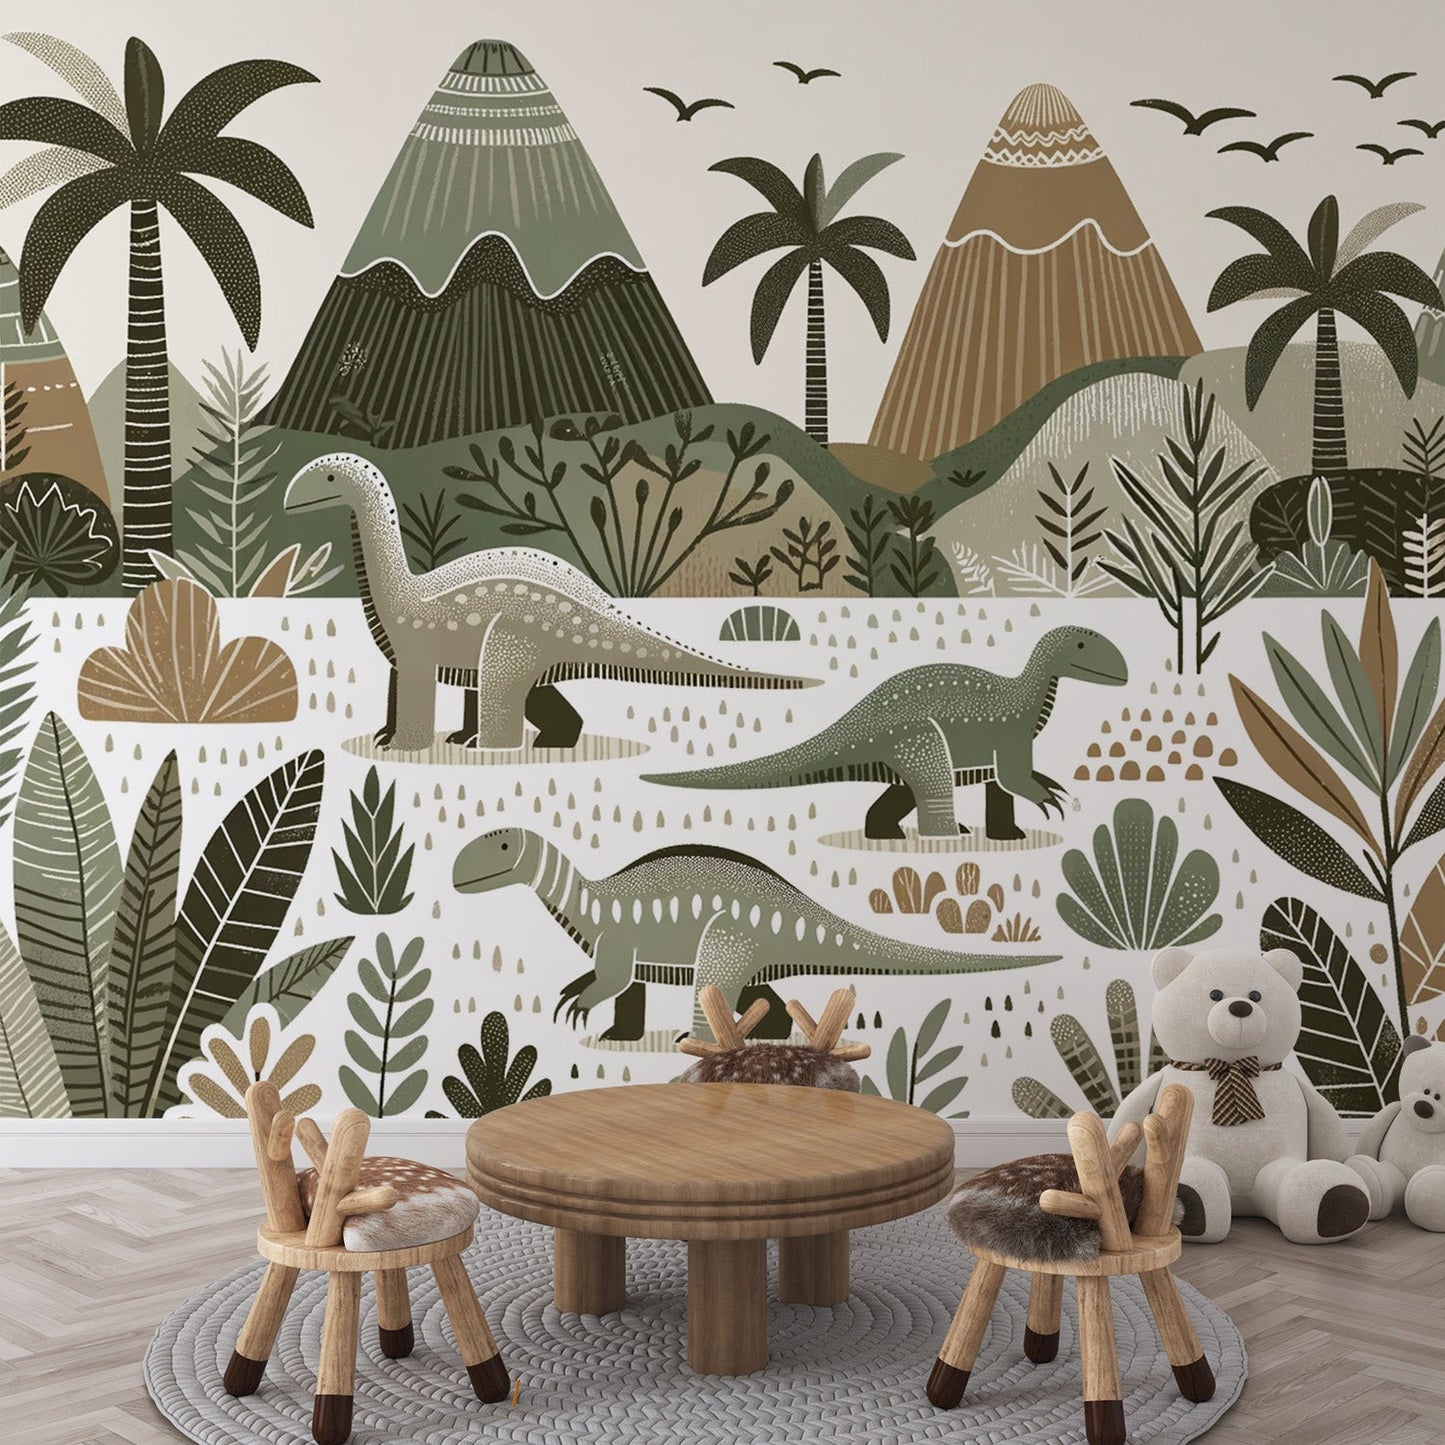 Dinosaur wallpaper | Foliage and dinosaurs in neutral tones